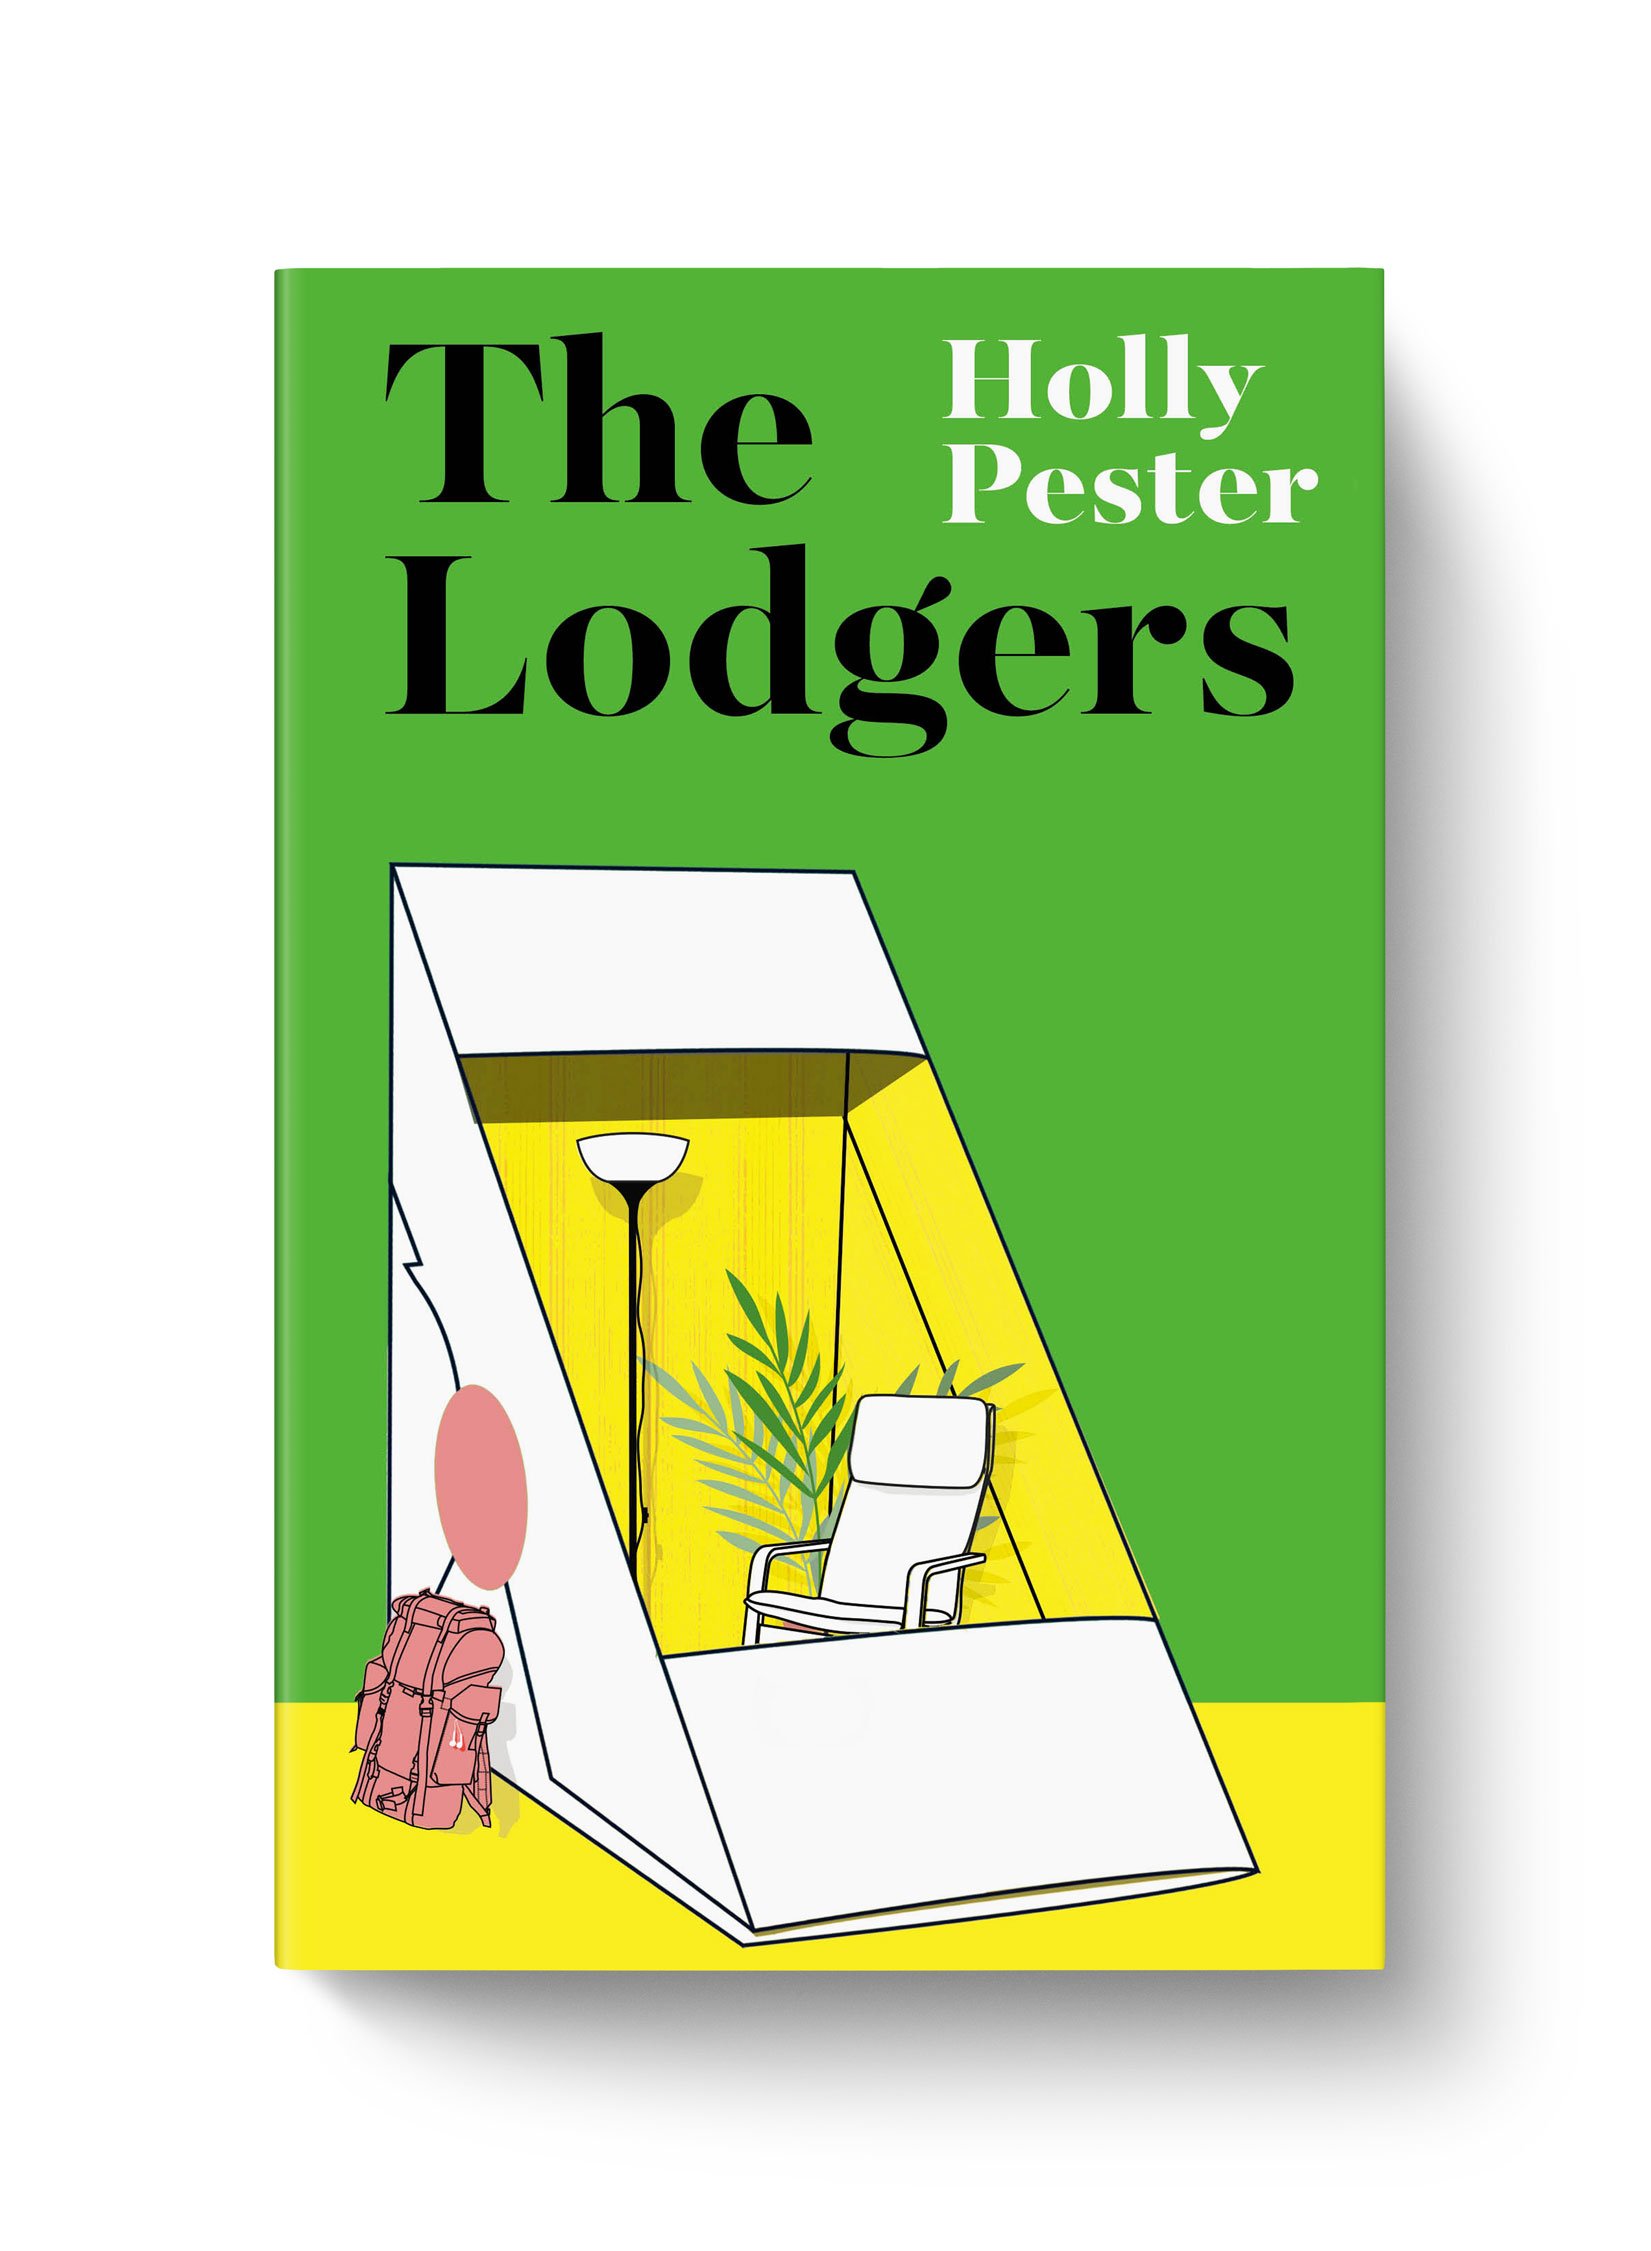   The Lodgers  Holly Pester  Granta 